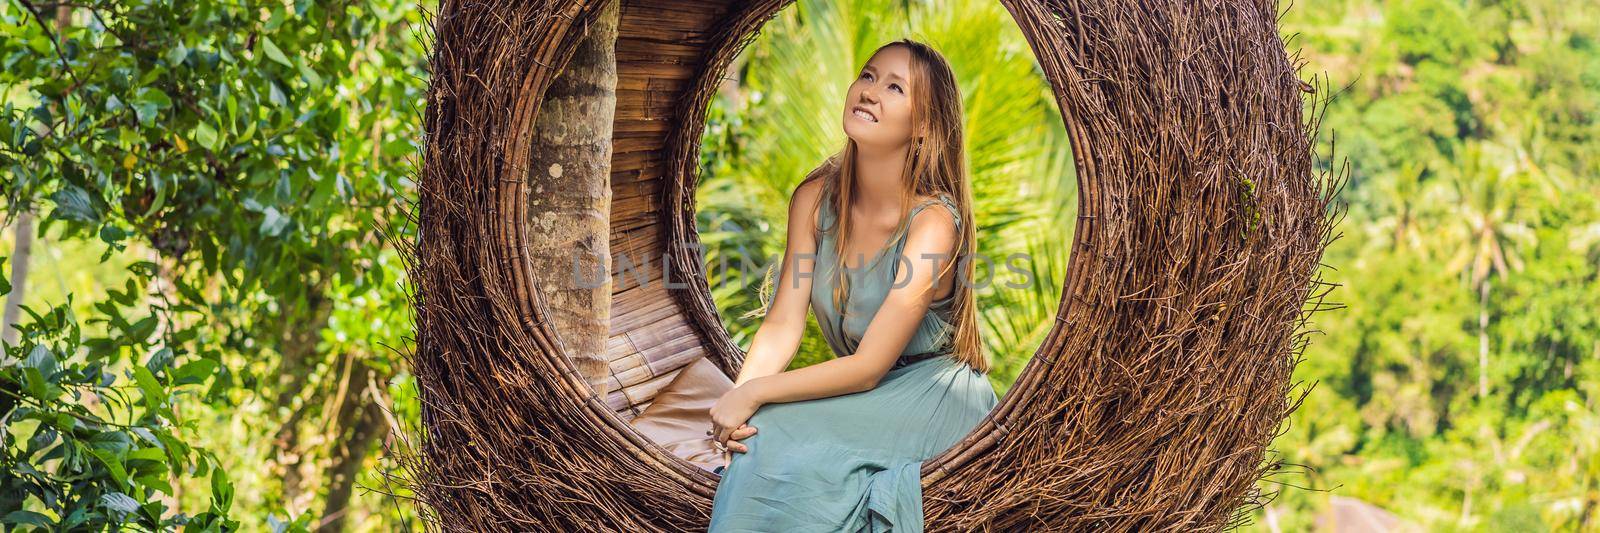 BANNER, LONG FORMAT Bali trend, straw nests everywhere. Young tourist enjoying her travel around Bali island, Indonesia. Making a stop on a beautiful hill. Photo in a straw nest, natural environment. Lifestyle by galitskaya